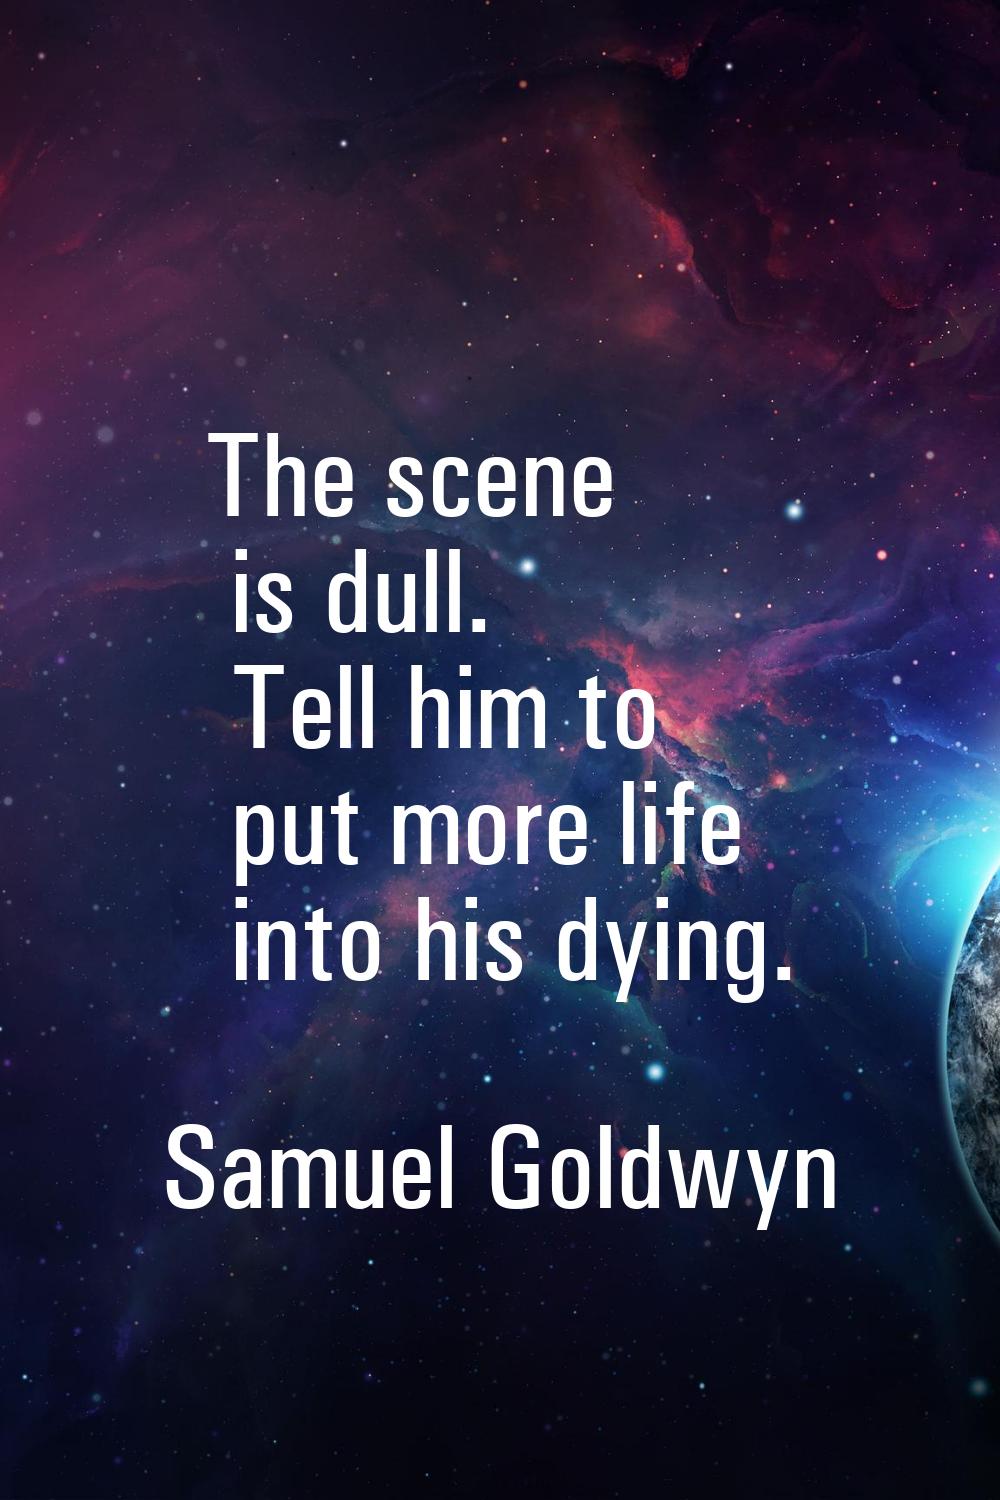 The scene is dull. Tell him to put more life into his dying.